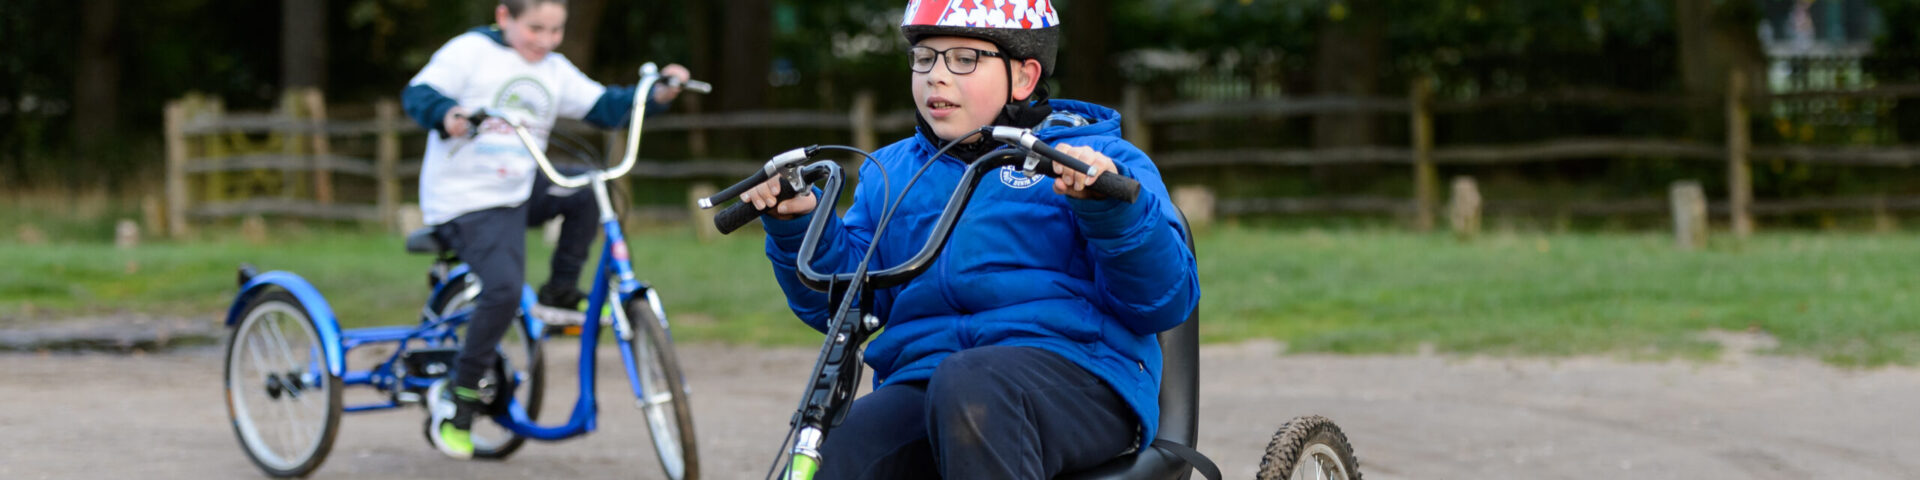 A young person with a disability cycling outdoors. (Image by Sport England.)